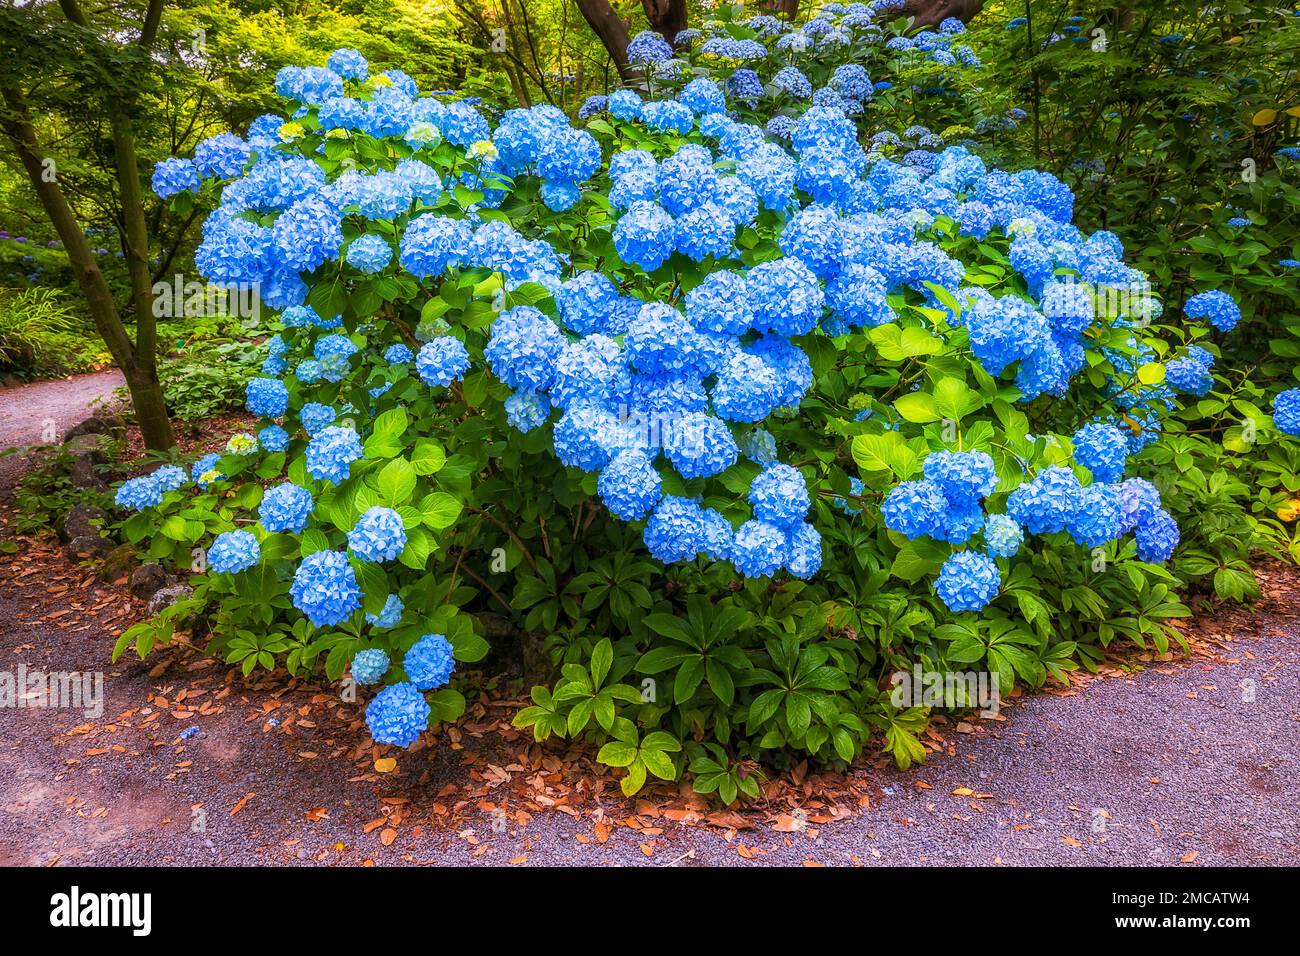 Blue blossoming bush of hydrangea flowers in public park of Christchurch in New Zealand. Stock Photo